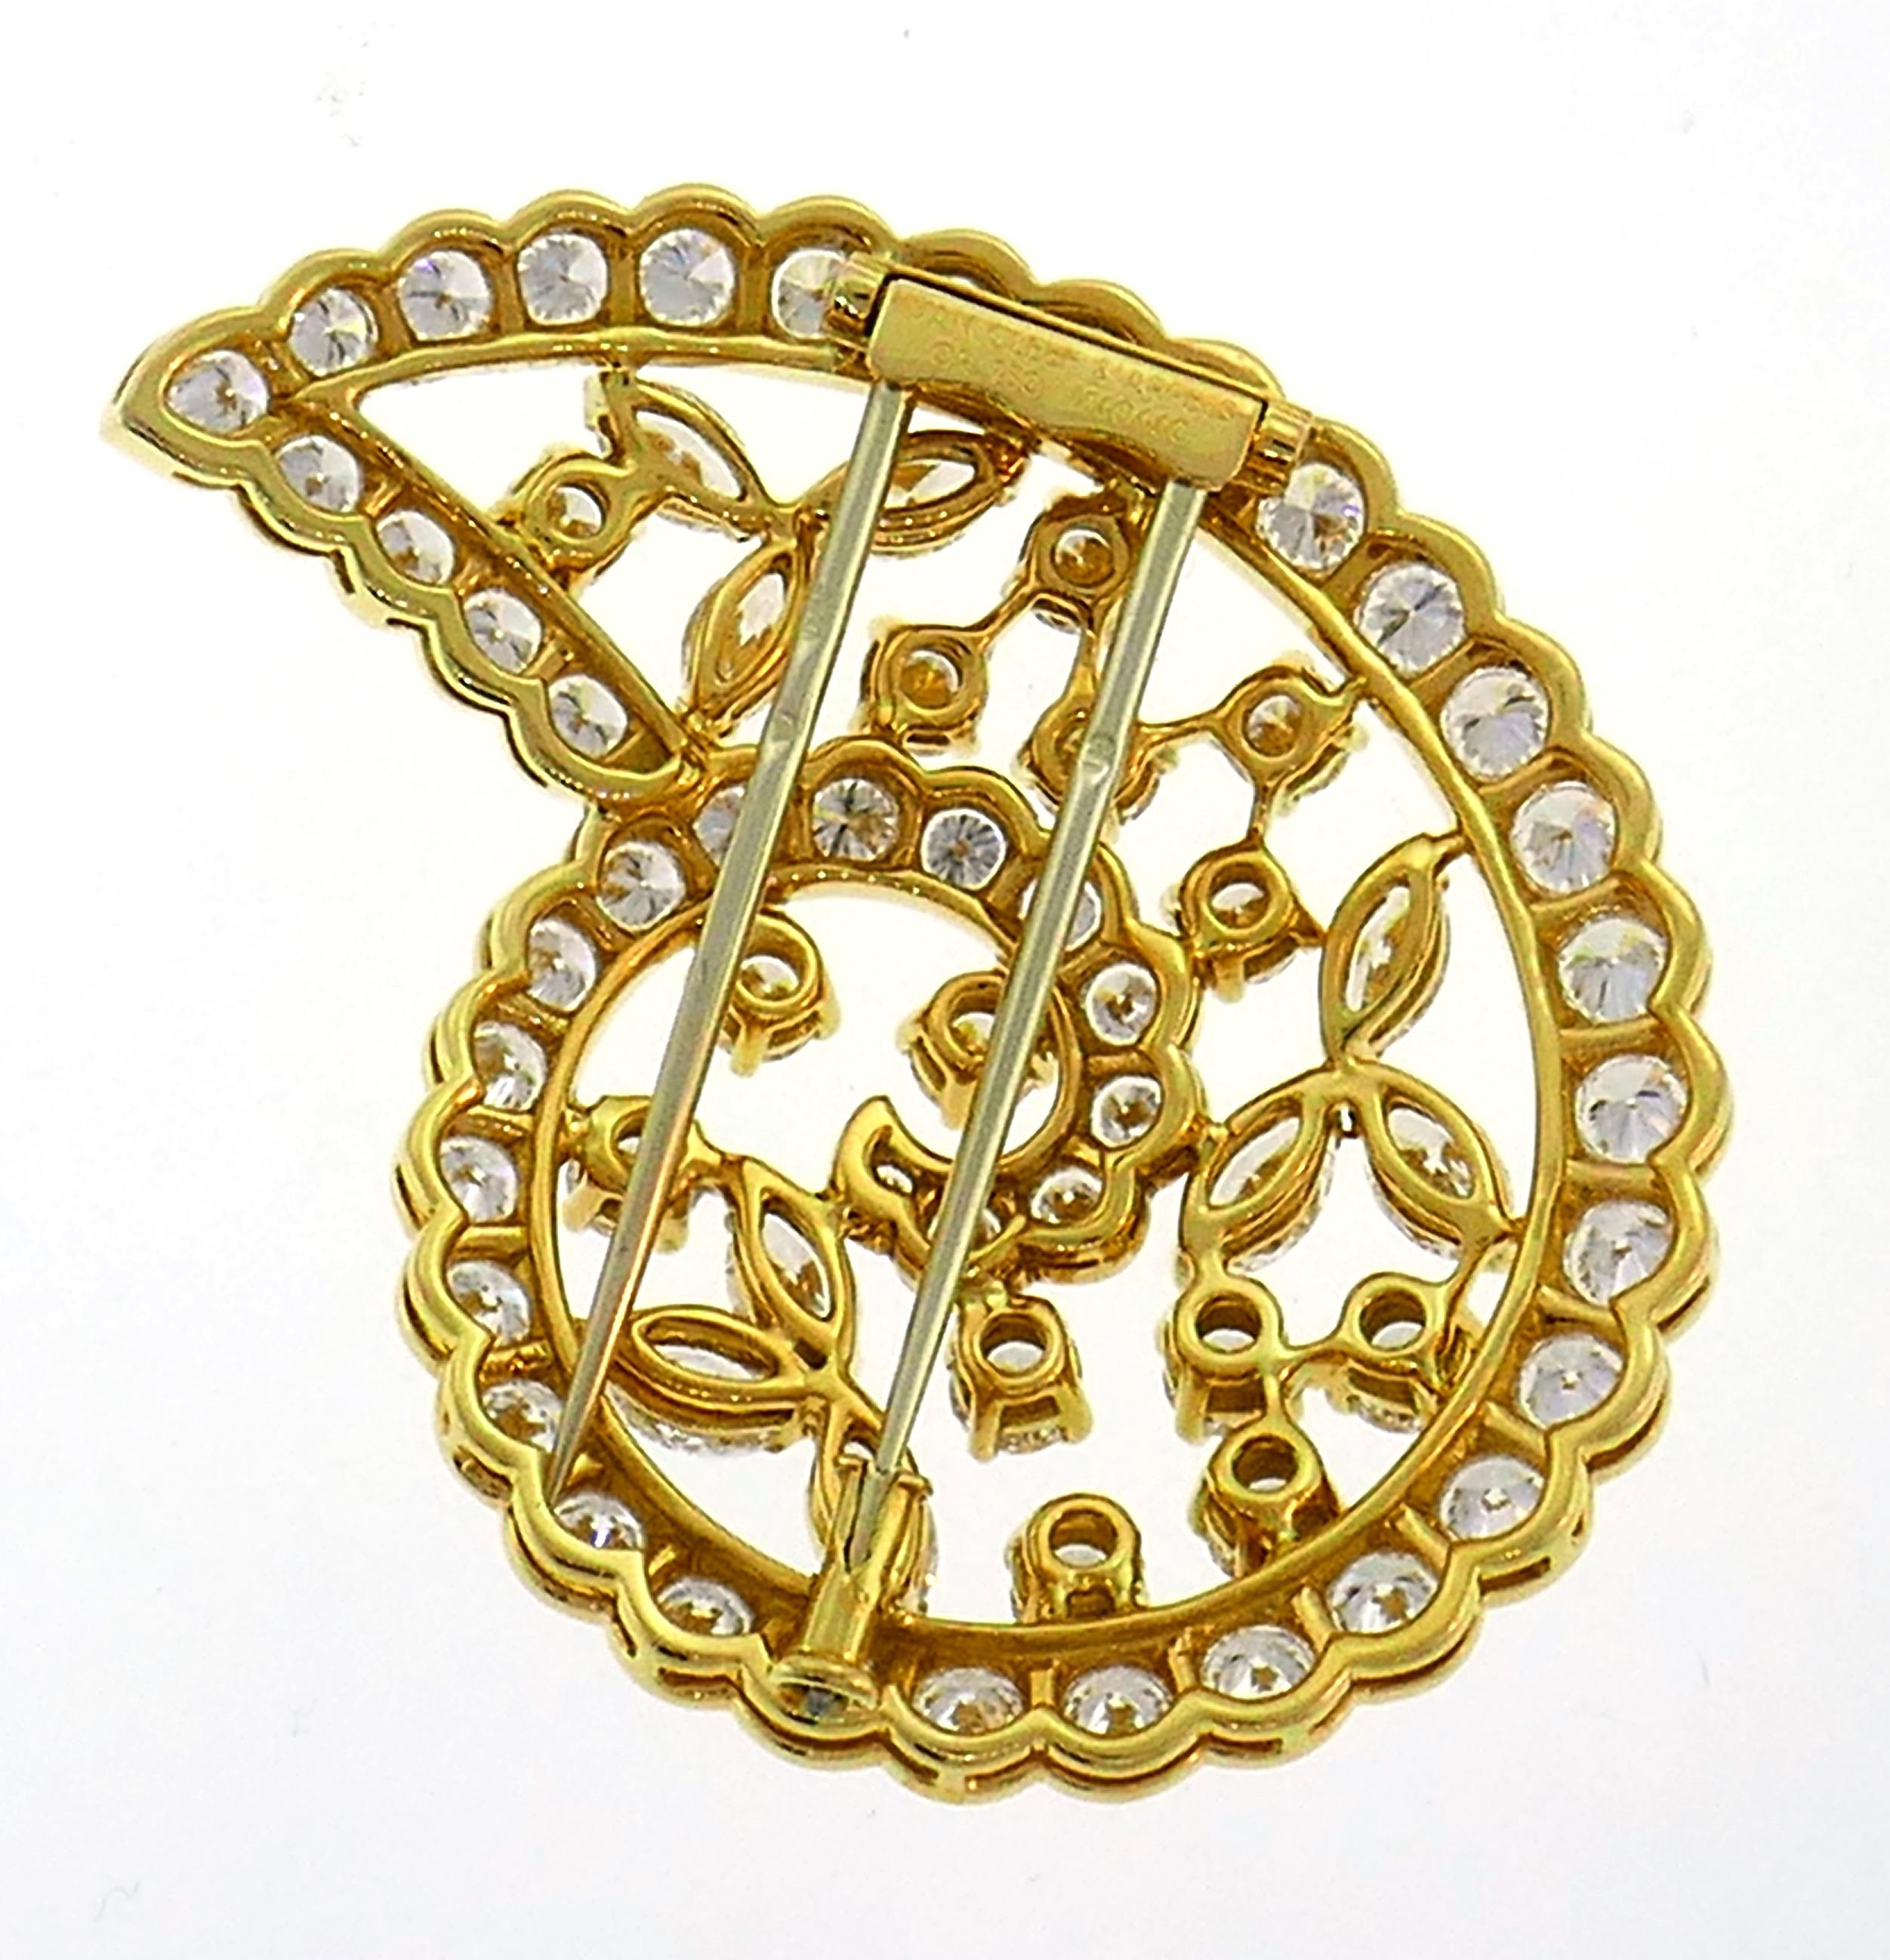 Stunning diamond clip created by Van Cleef & Arpels. Classy and timeless, the brooch is a great addition to your jewelry collection. 
The brooch is made of 18 karat yellow gold and set with fifty-eight round brilliant cut diamonds of approximately